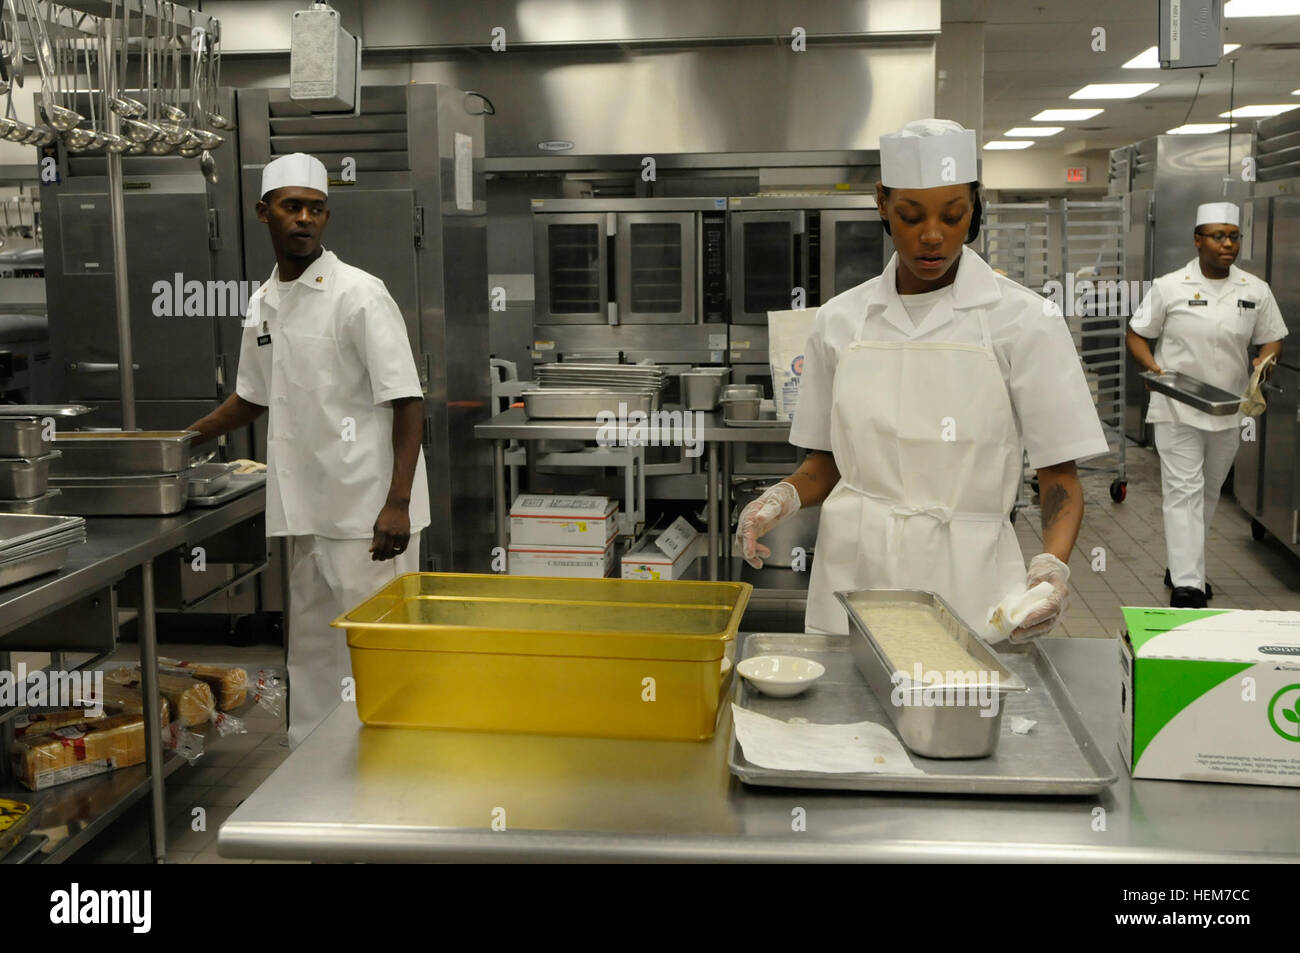 U.S. Army Pvt. Brinette Gibbs, (center), a native of Washington D.C., a food service specialist assigned to 377th Transportation Company, 15th Sustainment Brigade, prepares wipes the edge of a gravy tray prior to morning food service operations at Area 1 dining facility, June 20, 2012. She and other food service specialists prepare breakfast and lunch ahead of the second shift, which focuses on preparing dinner for soldiers on Biggs Army Airfield. Food service specialists provide quality meals for Fort Bliss personnel 626104 Stock Photo